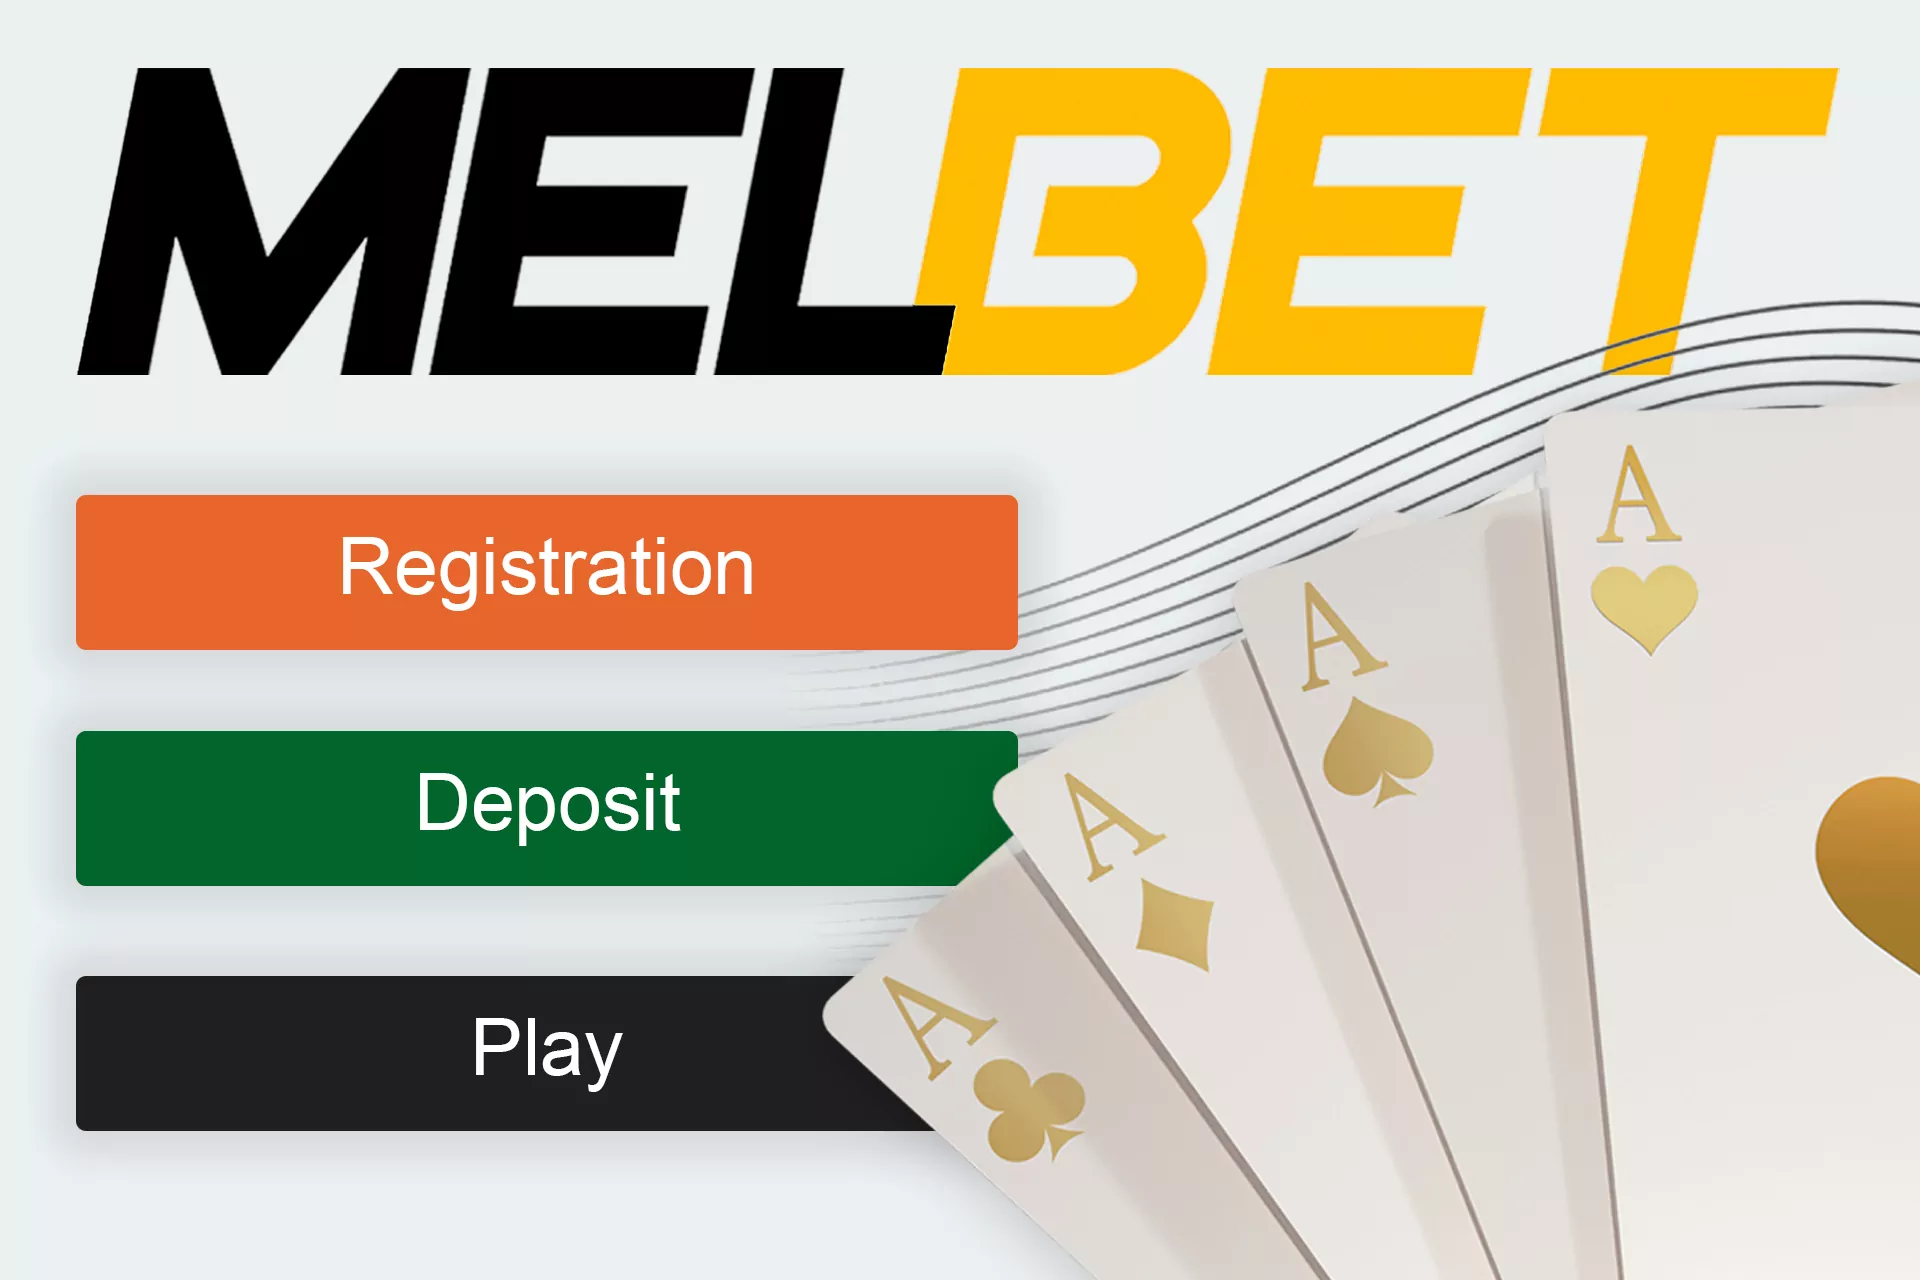 Create an account and make a deposit to start playing at Melbet casino.